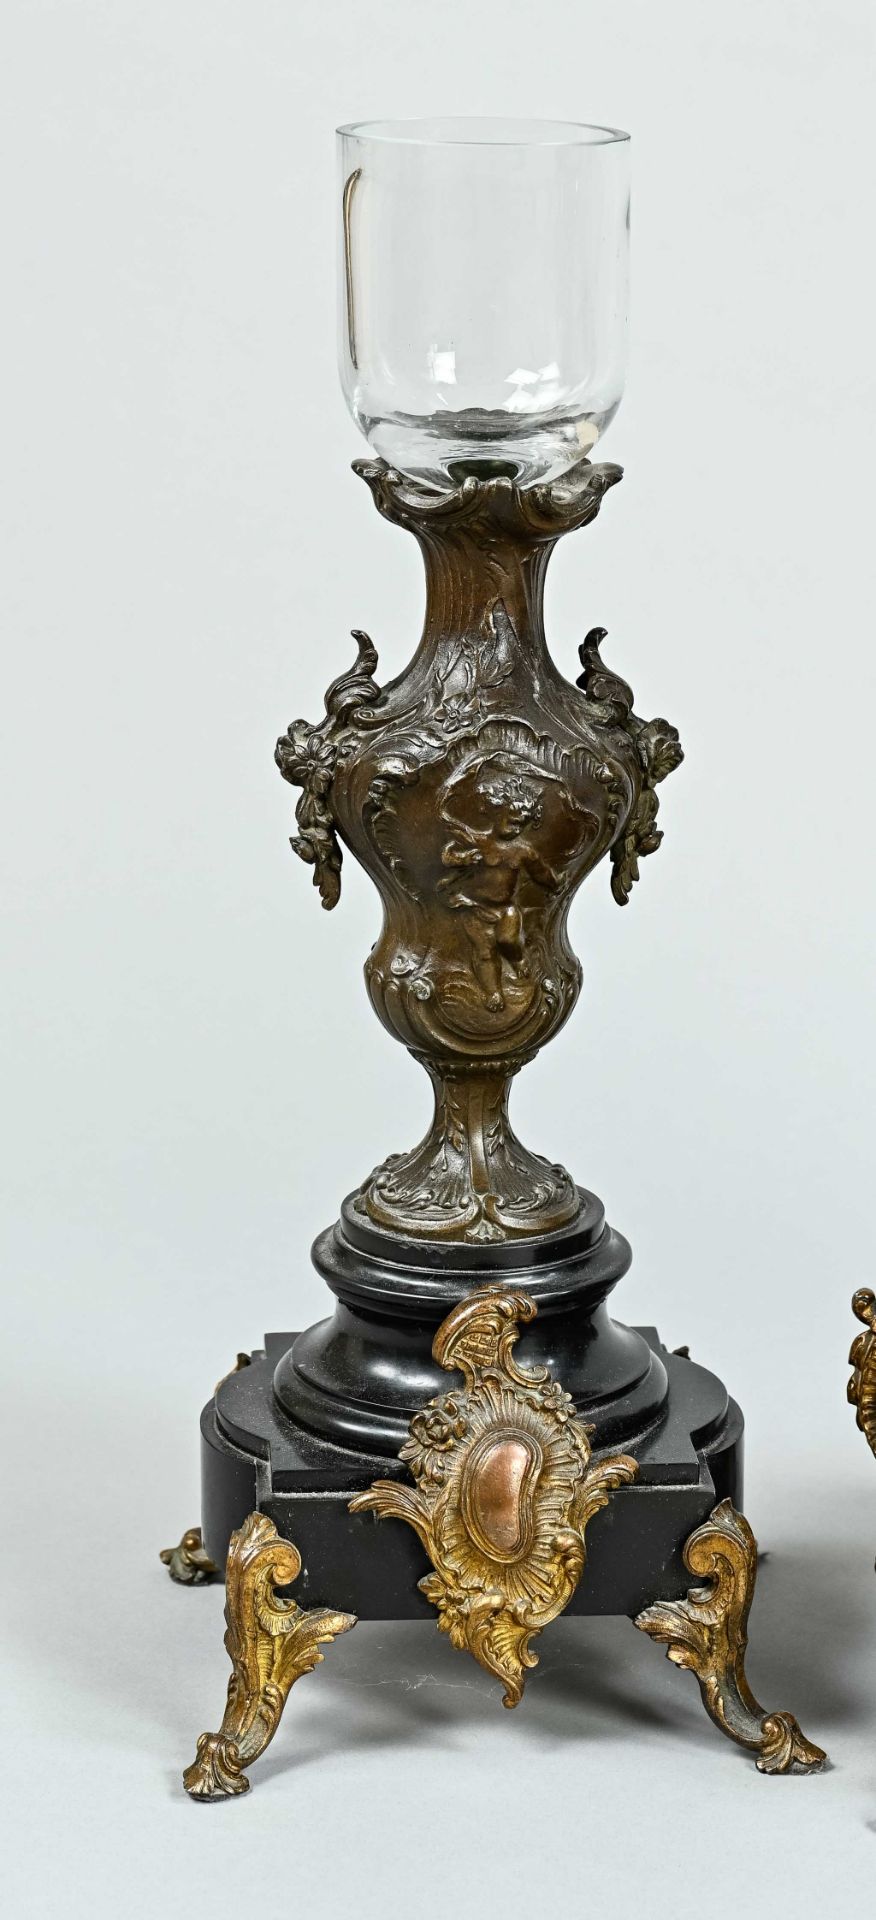 Fireplace clock with side plate, German circa 1860, bronzed zinc cast, plastic figure, as angel wit - Image 2 of 5